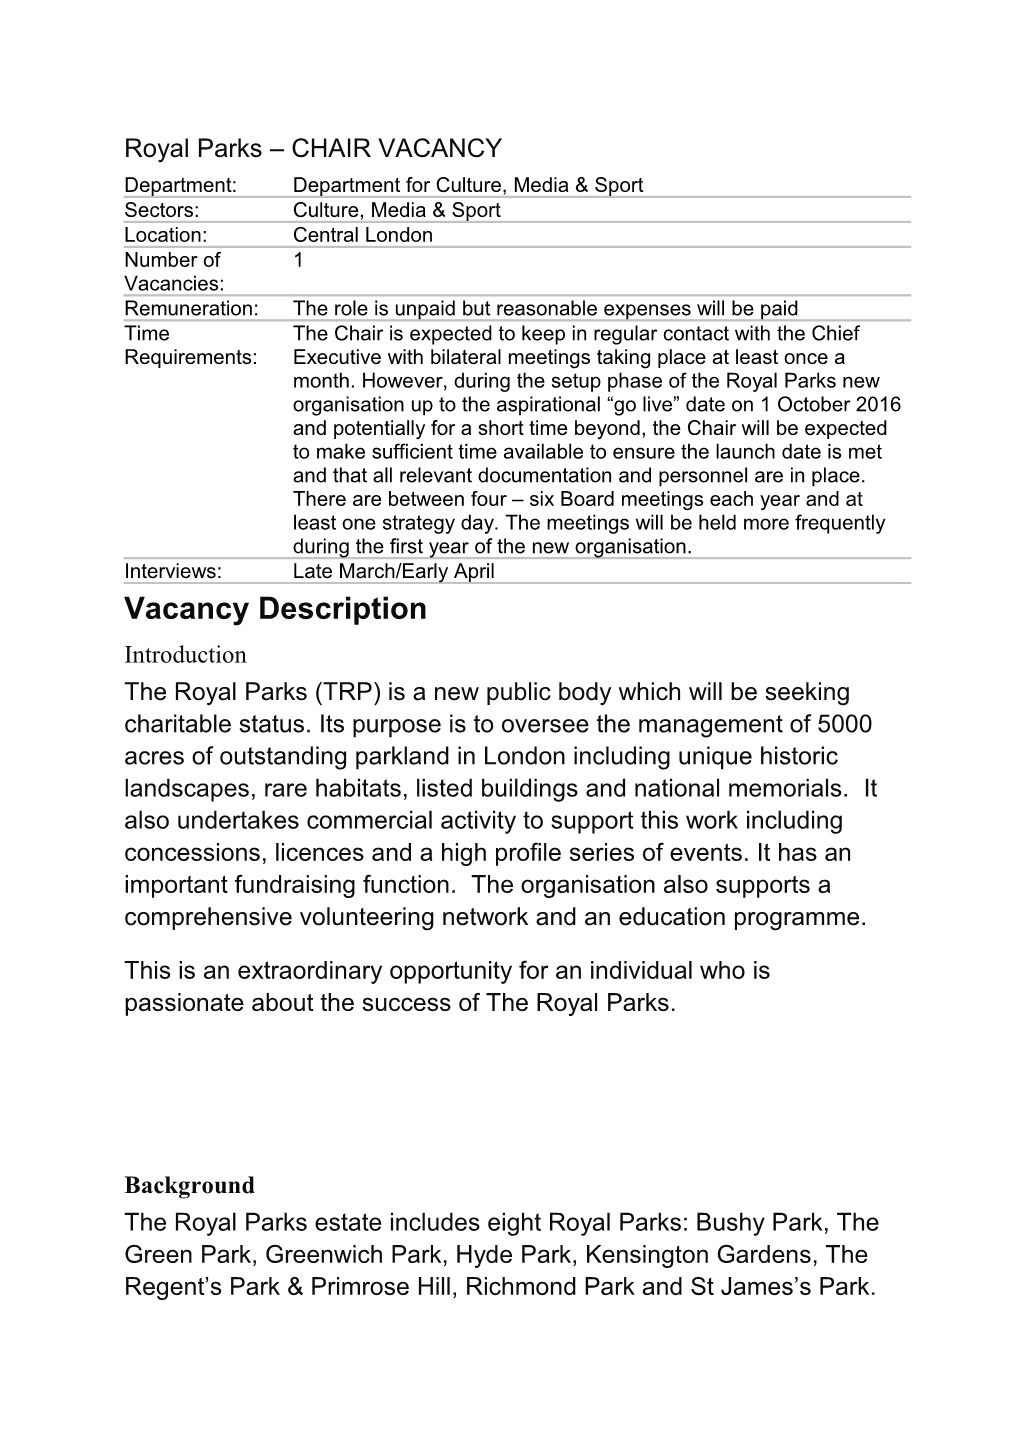 Royal Parks CHAIR VACANCY